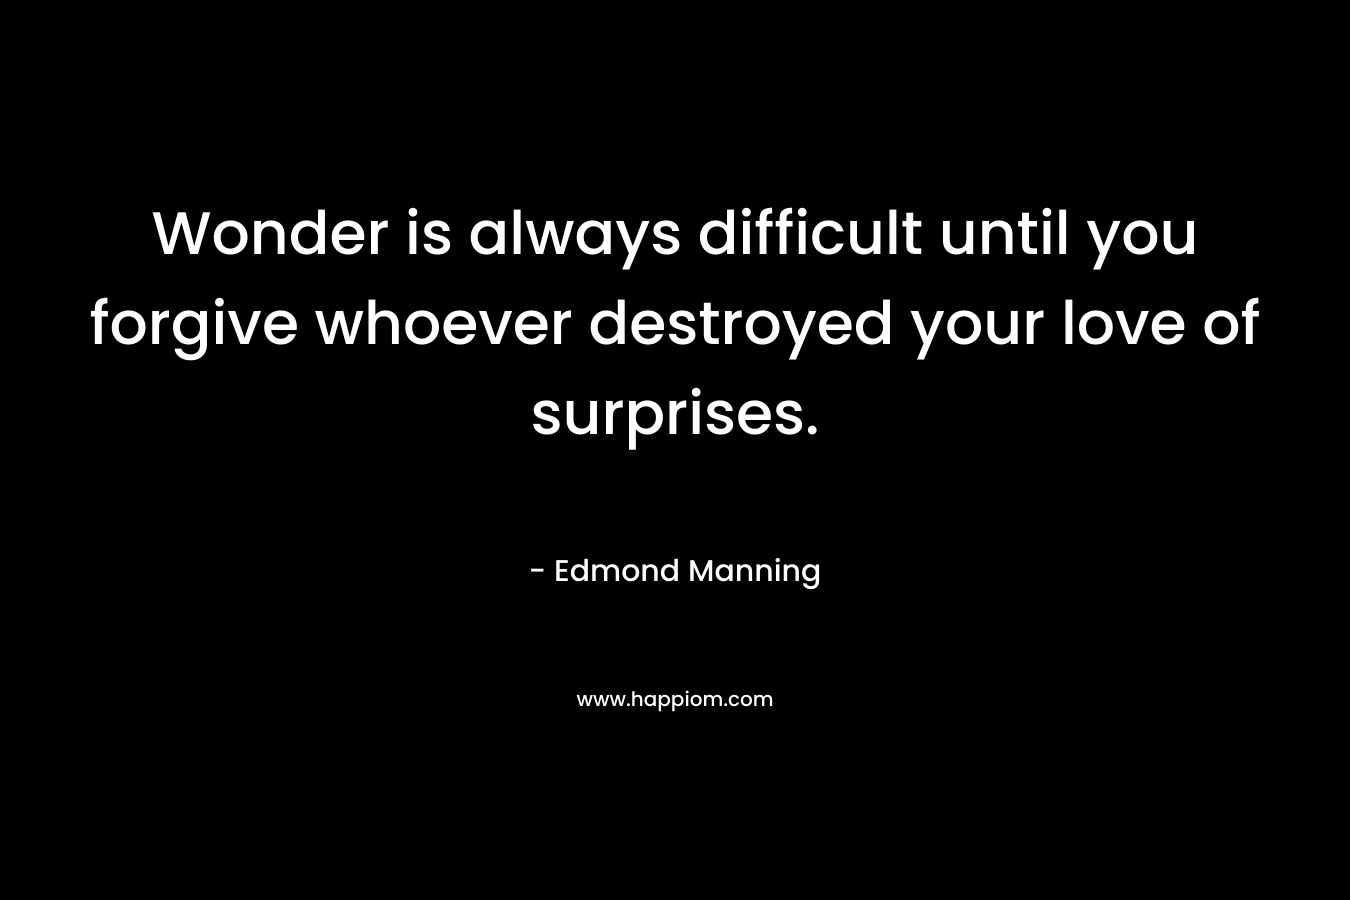 Wonder is always difficult until you forgive whoever destroyed your love of surprises.